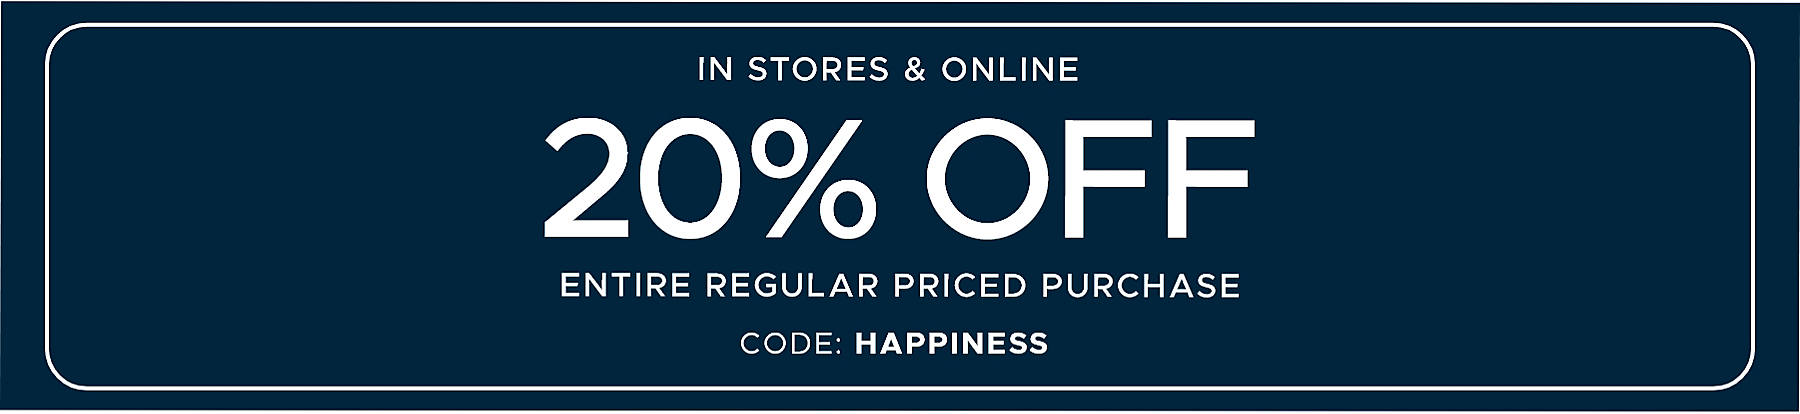 In Store & Online 20% off Entire Regular Priced Purchase code: HAPPINESS